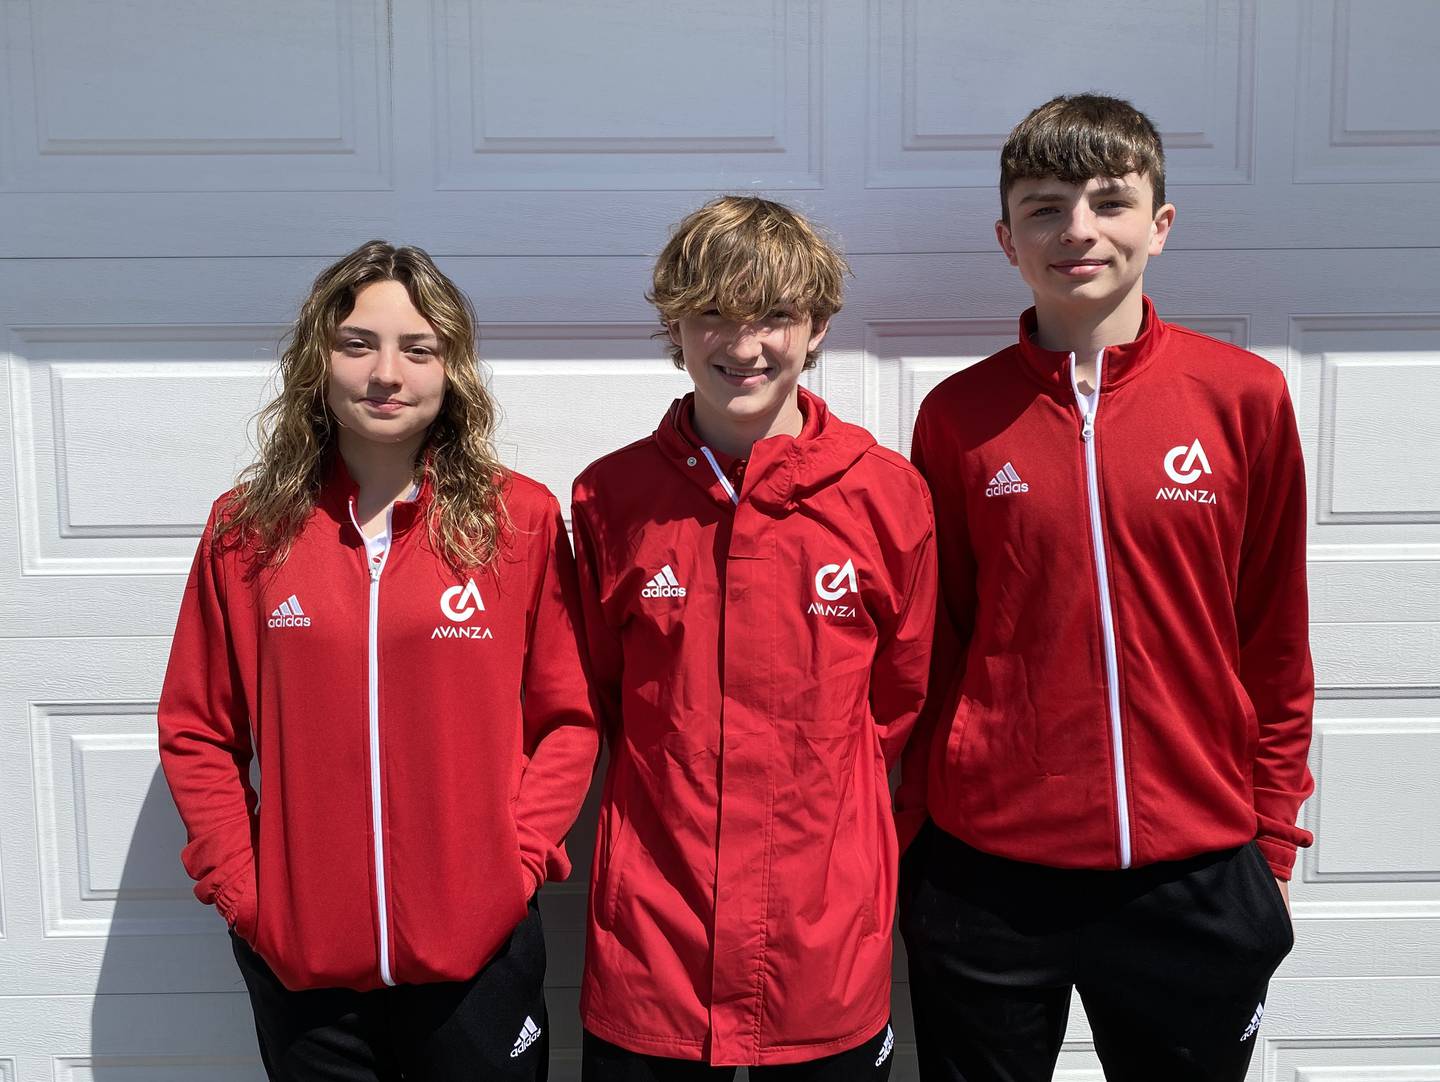 Three Streatorites - from left to right, Anna Russow, Noah Russow and Aaron Henson - took part in an Avanza International Soccer Experience earlier this month, traveling to Madrid, Spain, and competing against players from around the world.